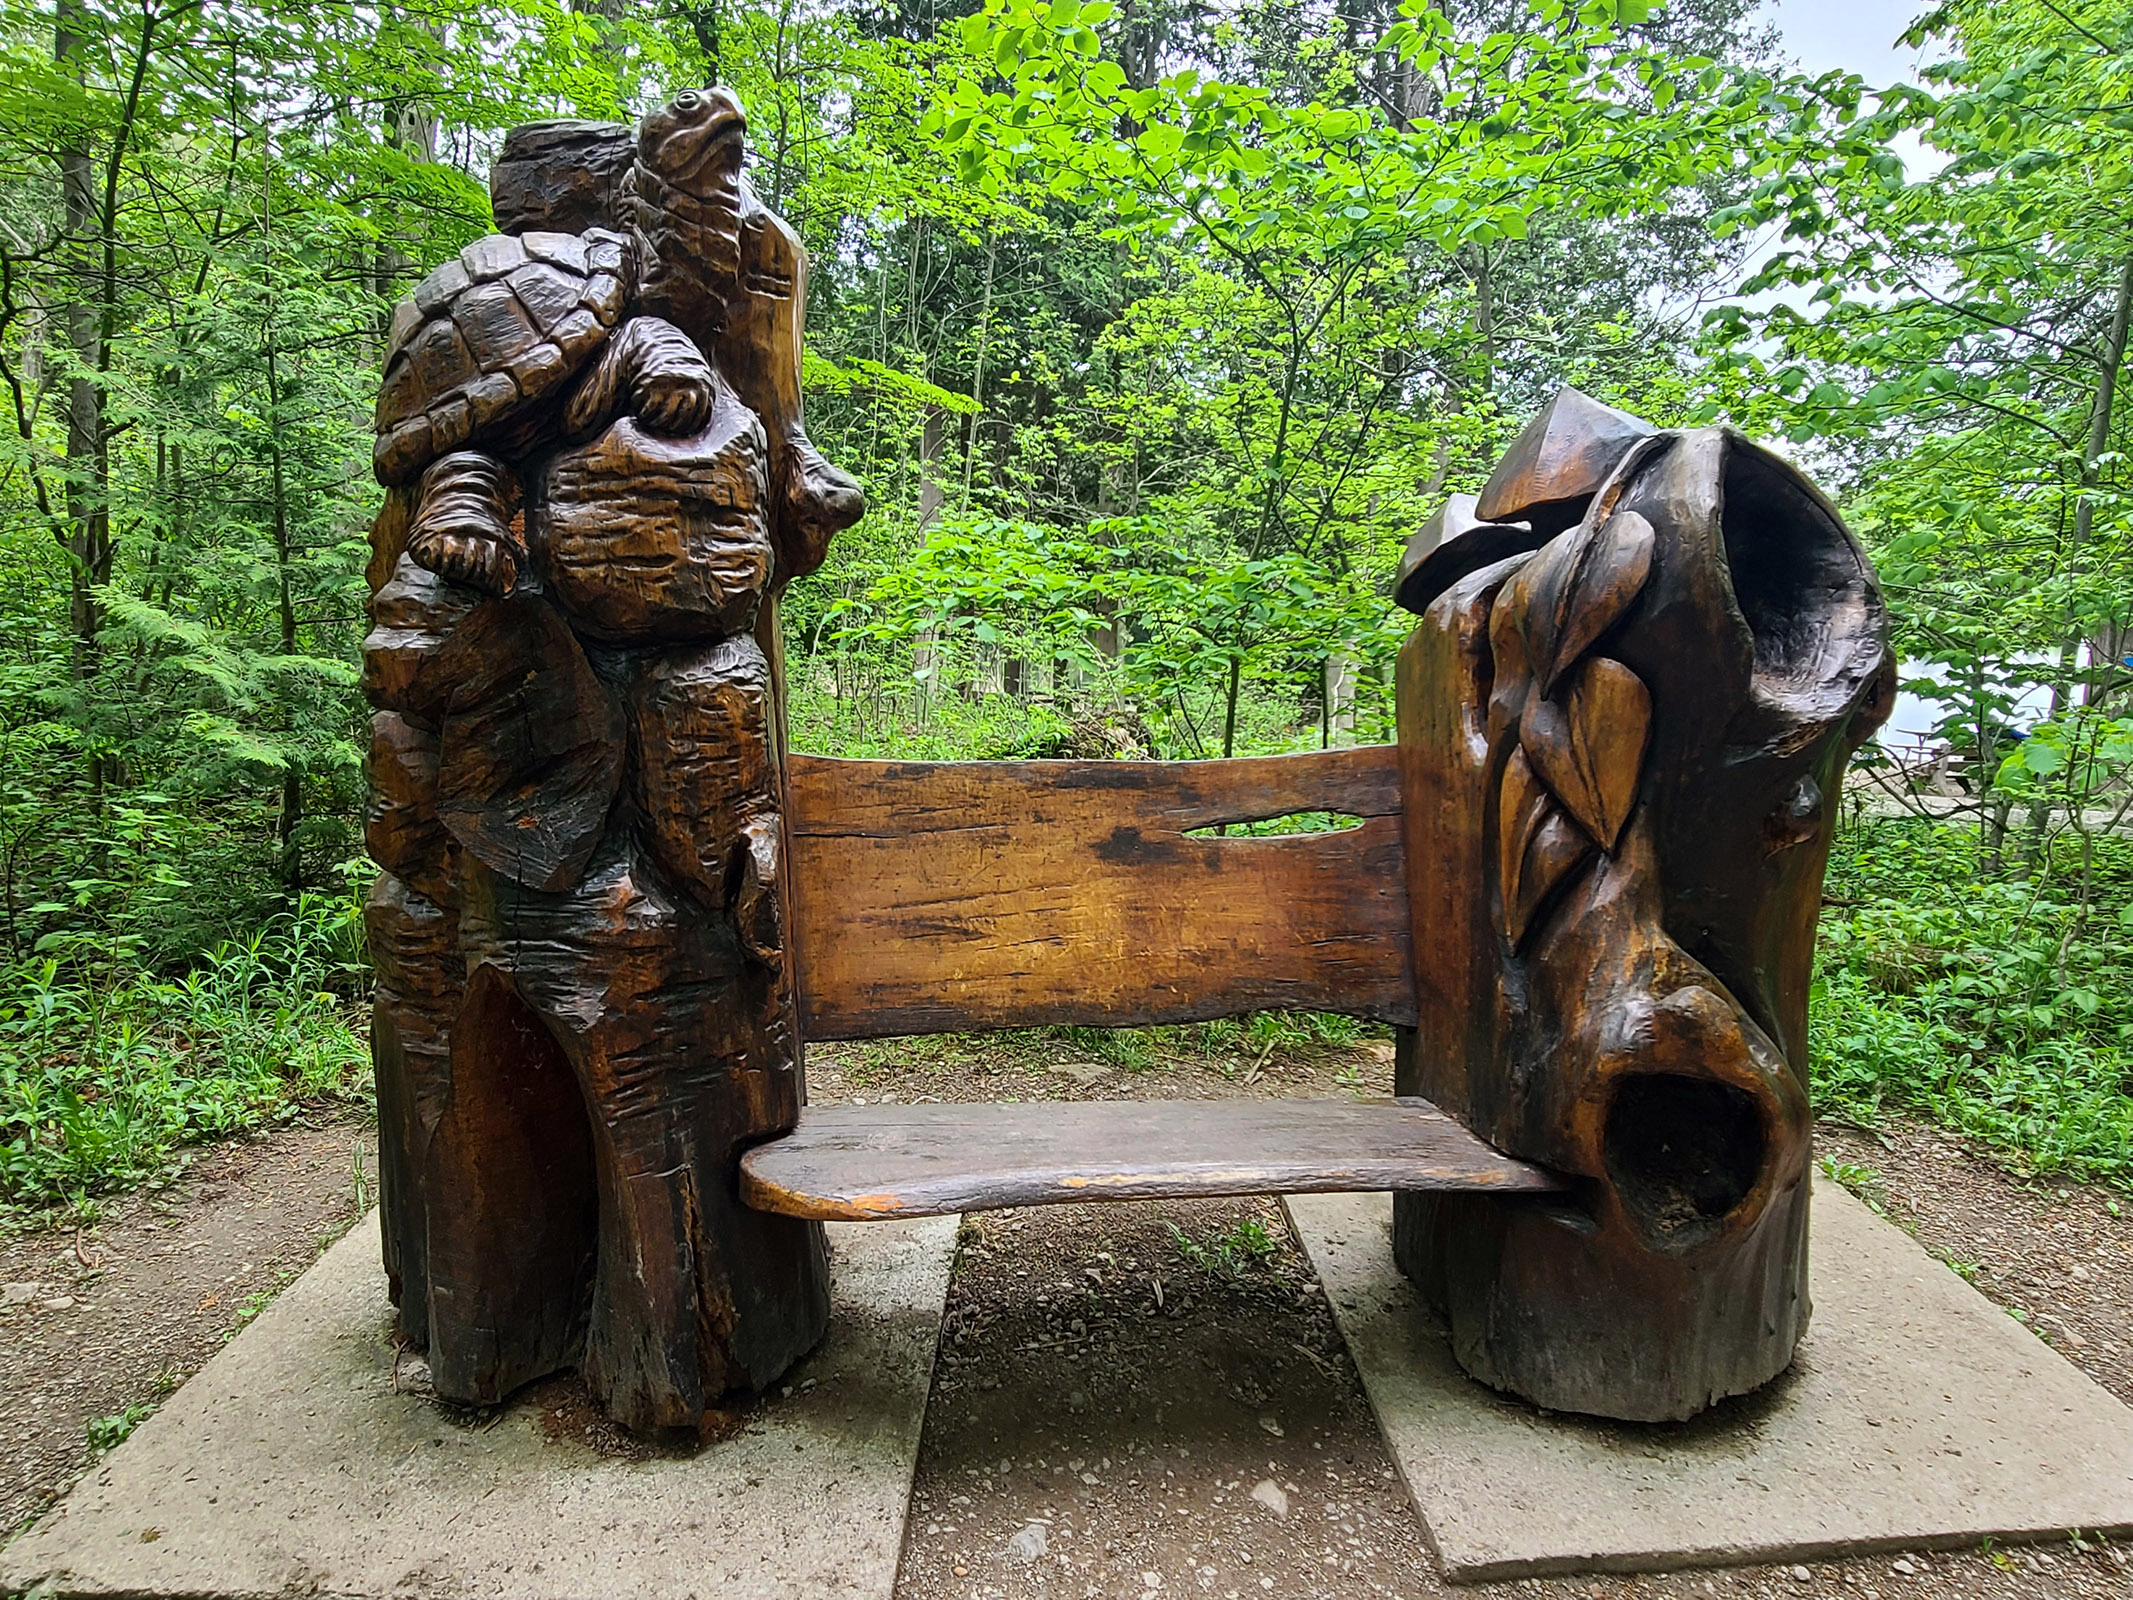 A carved wooden bench.